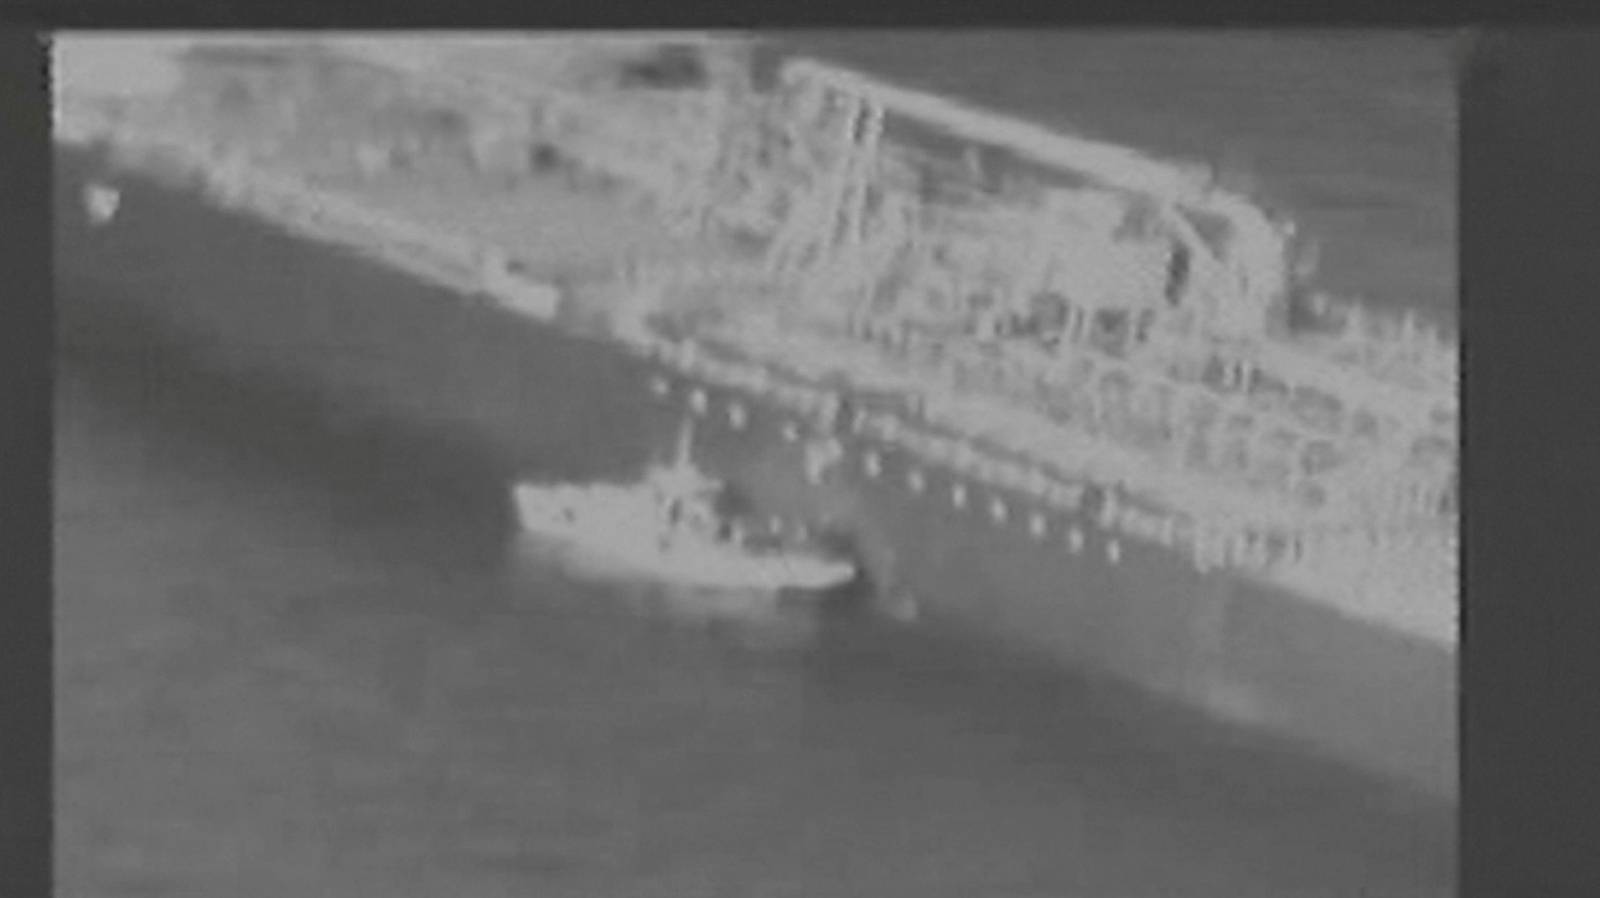 Still image taken from a U.S. military handout video purports to show Iran's Revolutionary Guard (IRGC) removing an unexploded limpet mine from the side of the Kokuka Courageous Tanker